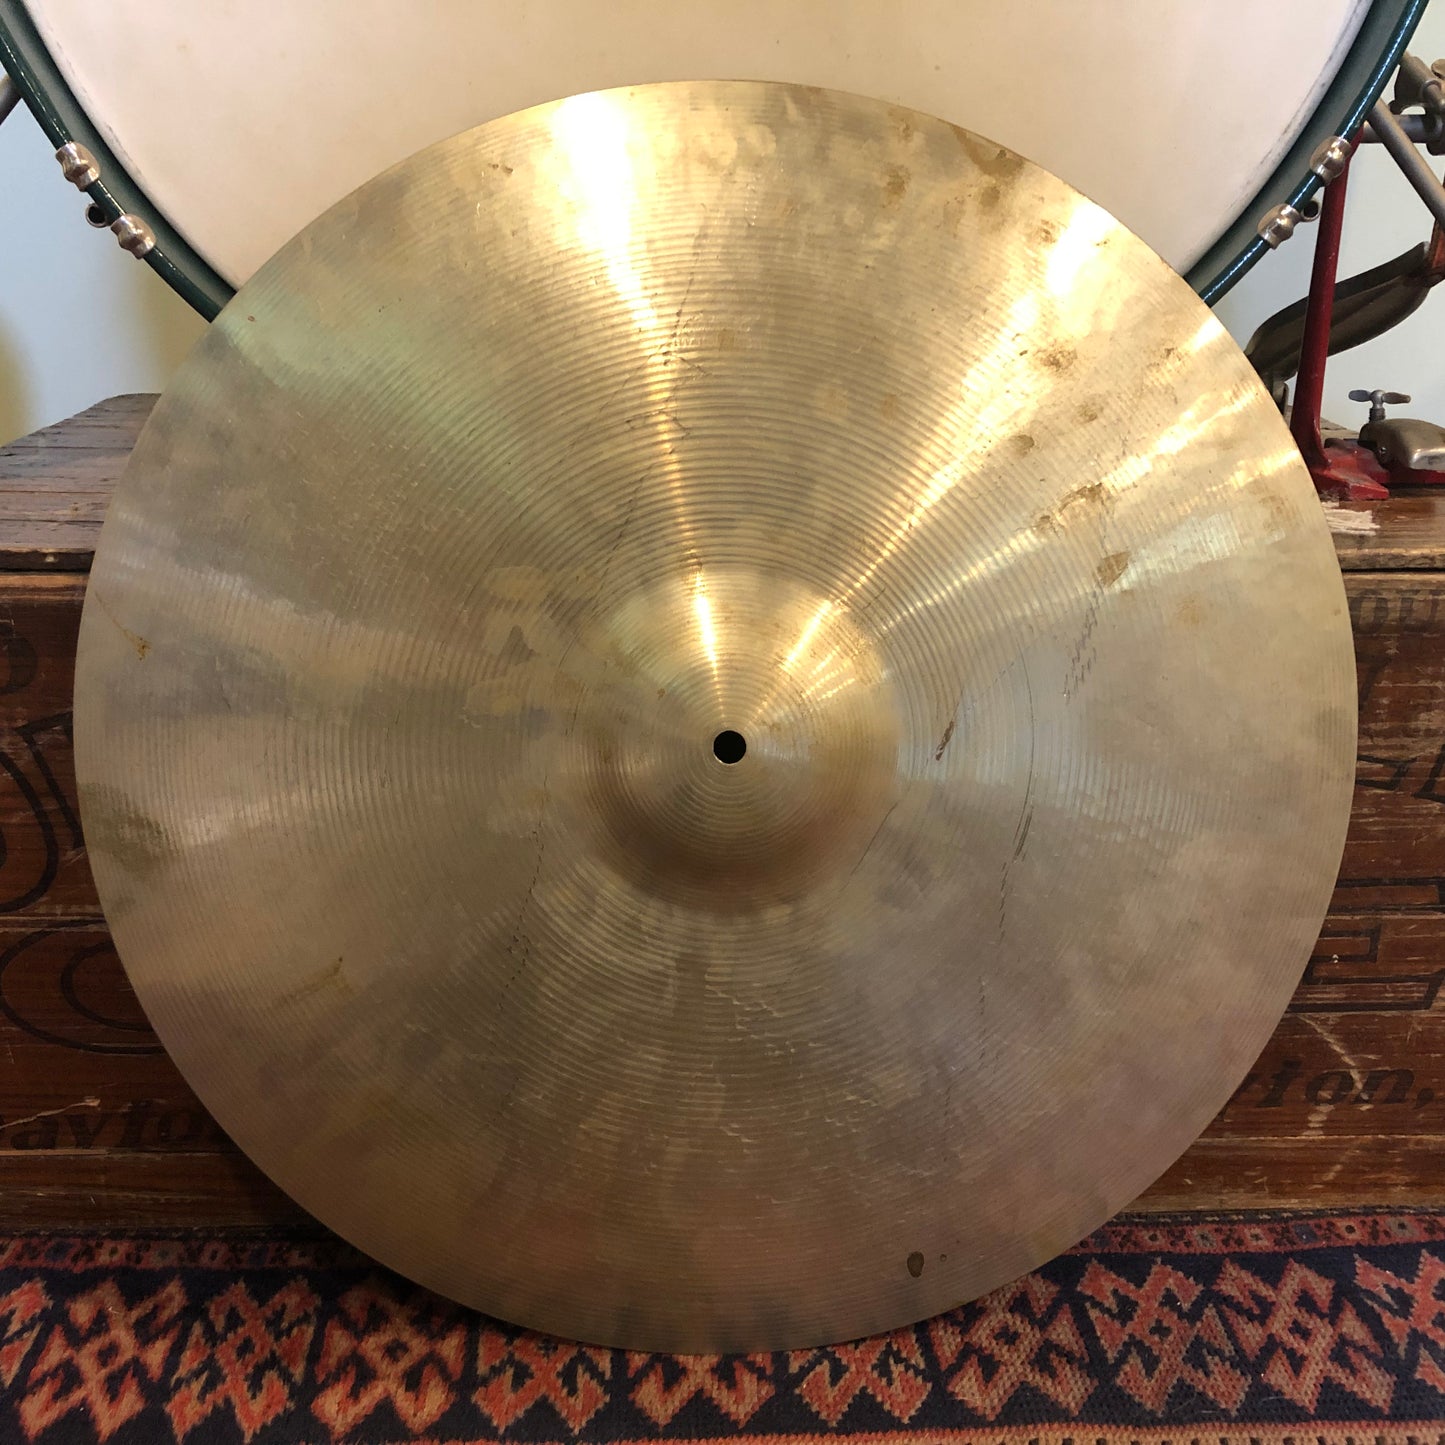 20" Paiste 1960s Ludwig Standard Ride Cymbal 1728g *Video Demo*